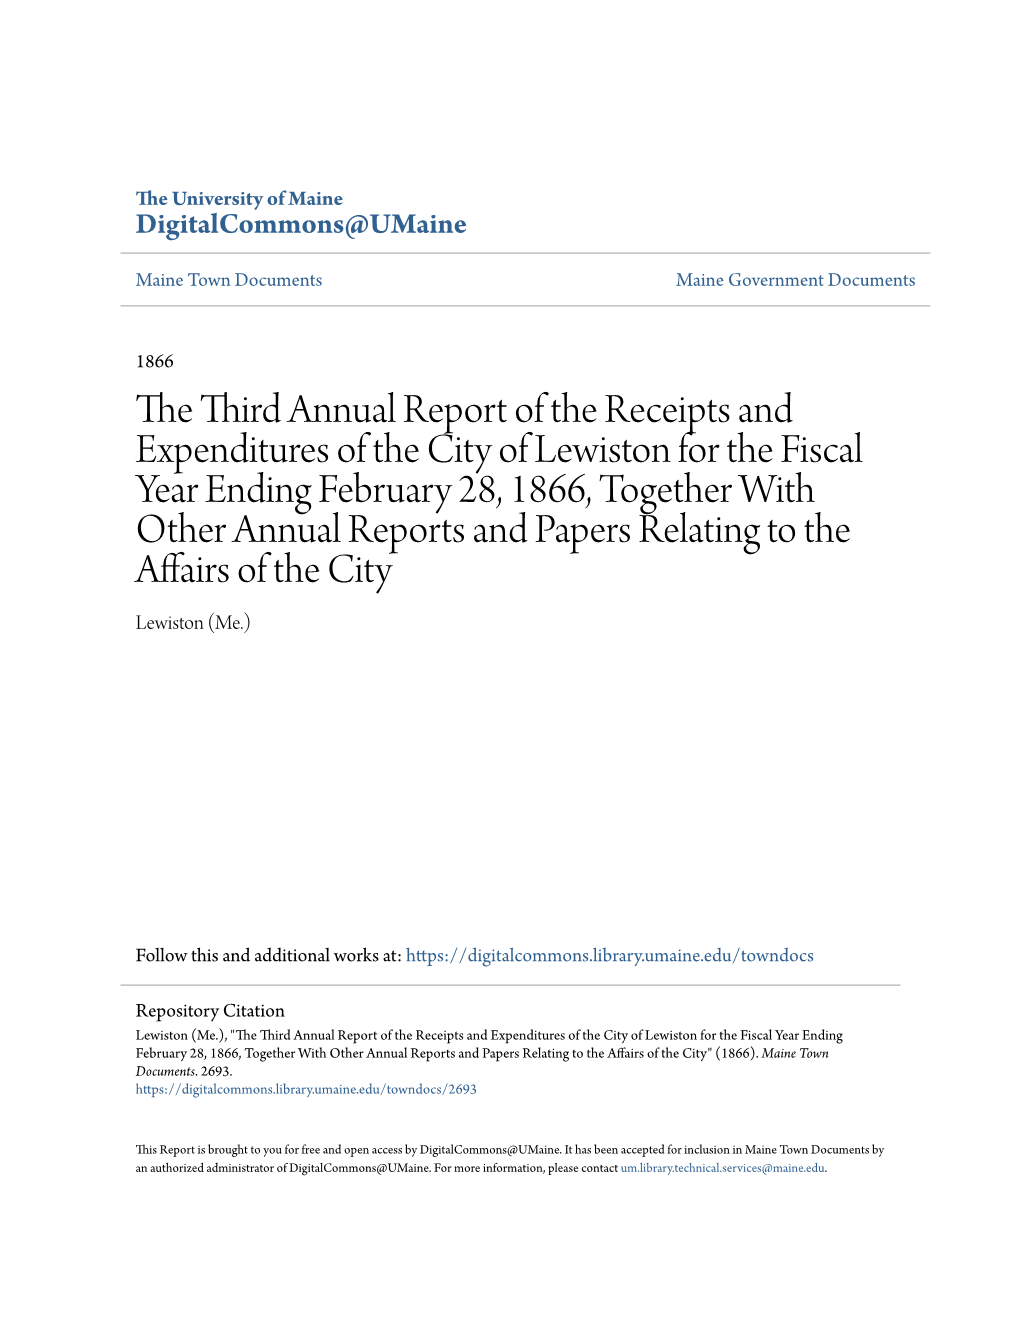 The Third Annual Report of the Receipts and Expenditures of The